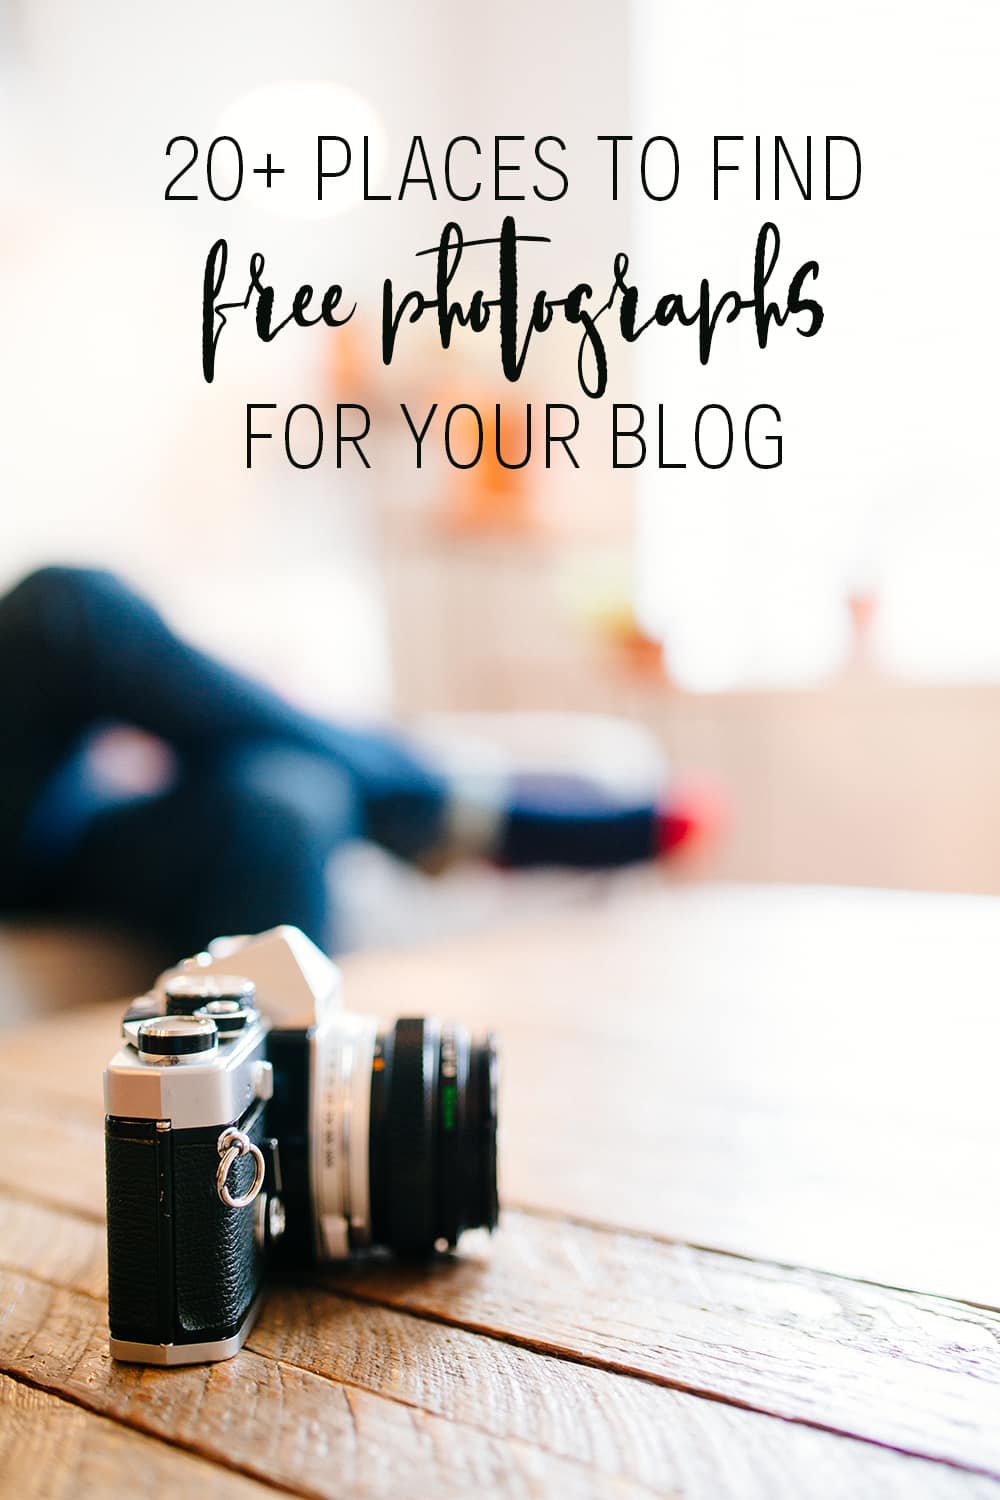 Over 20 different places to find awesome free photos for your blog. Never worry about your post lacking a visual element again!